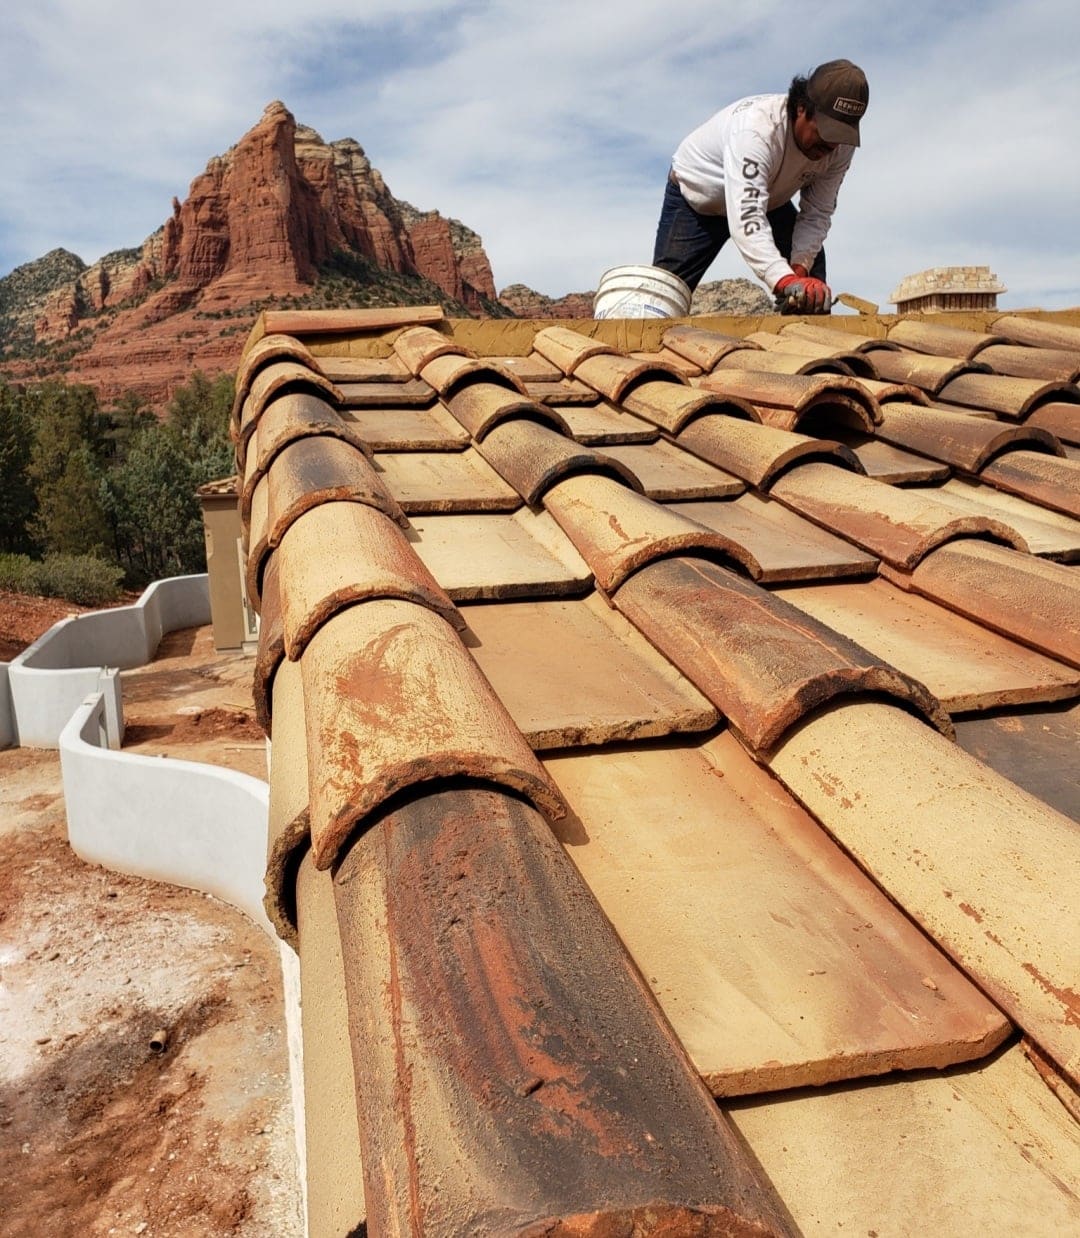 Roofer meticulously adjusting tiles atop a Fountain Hills structure.